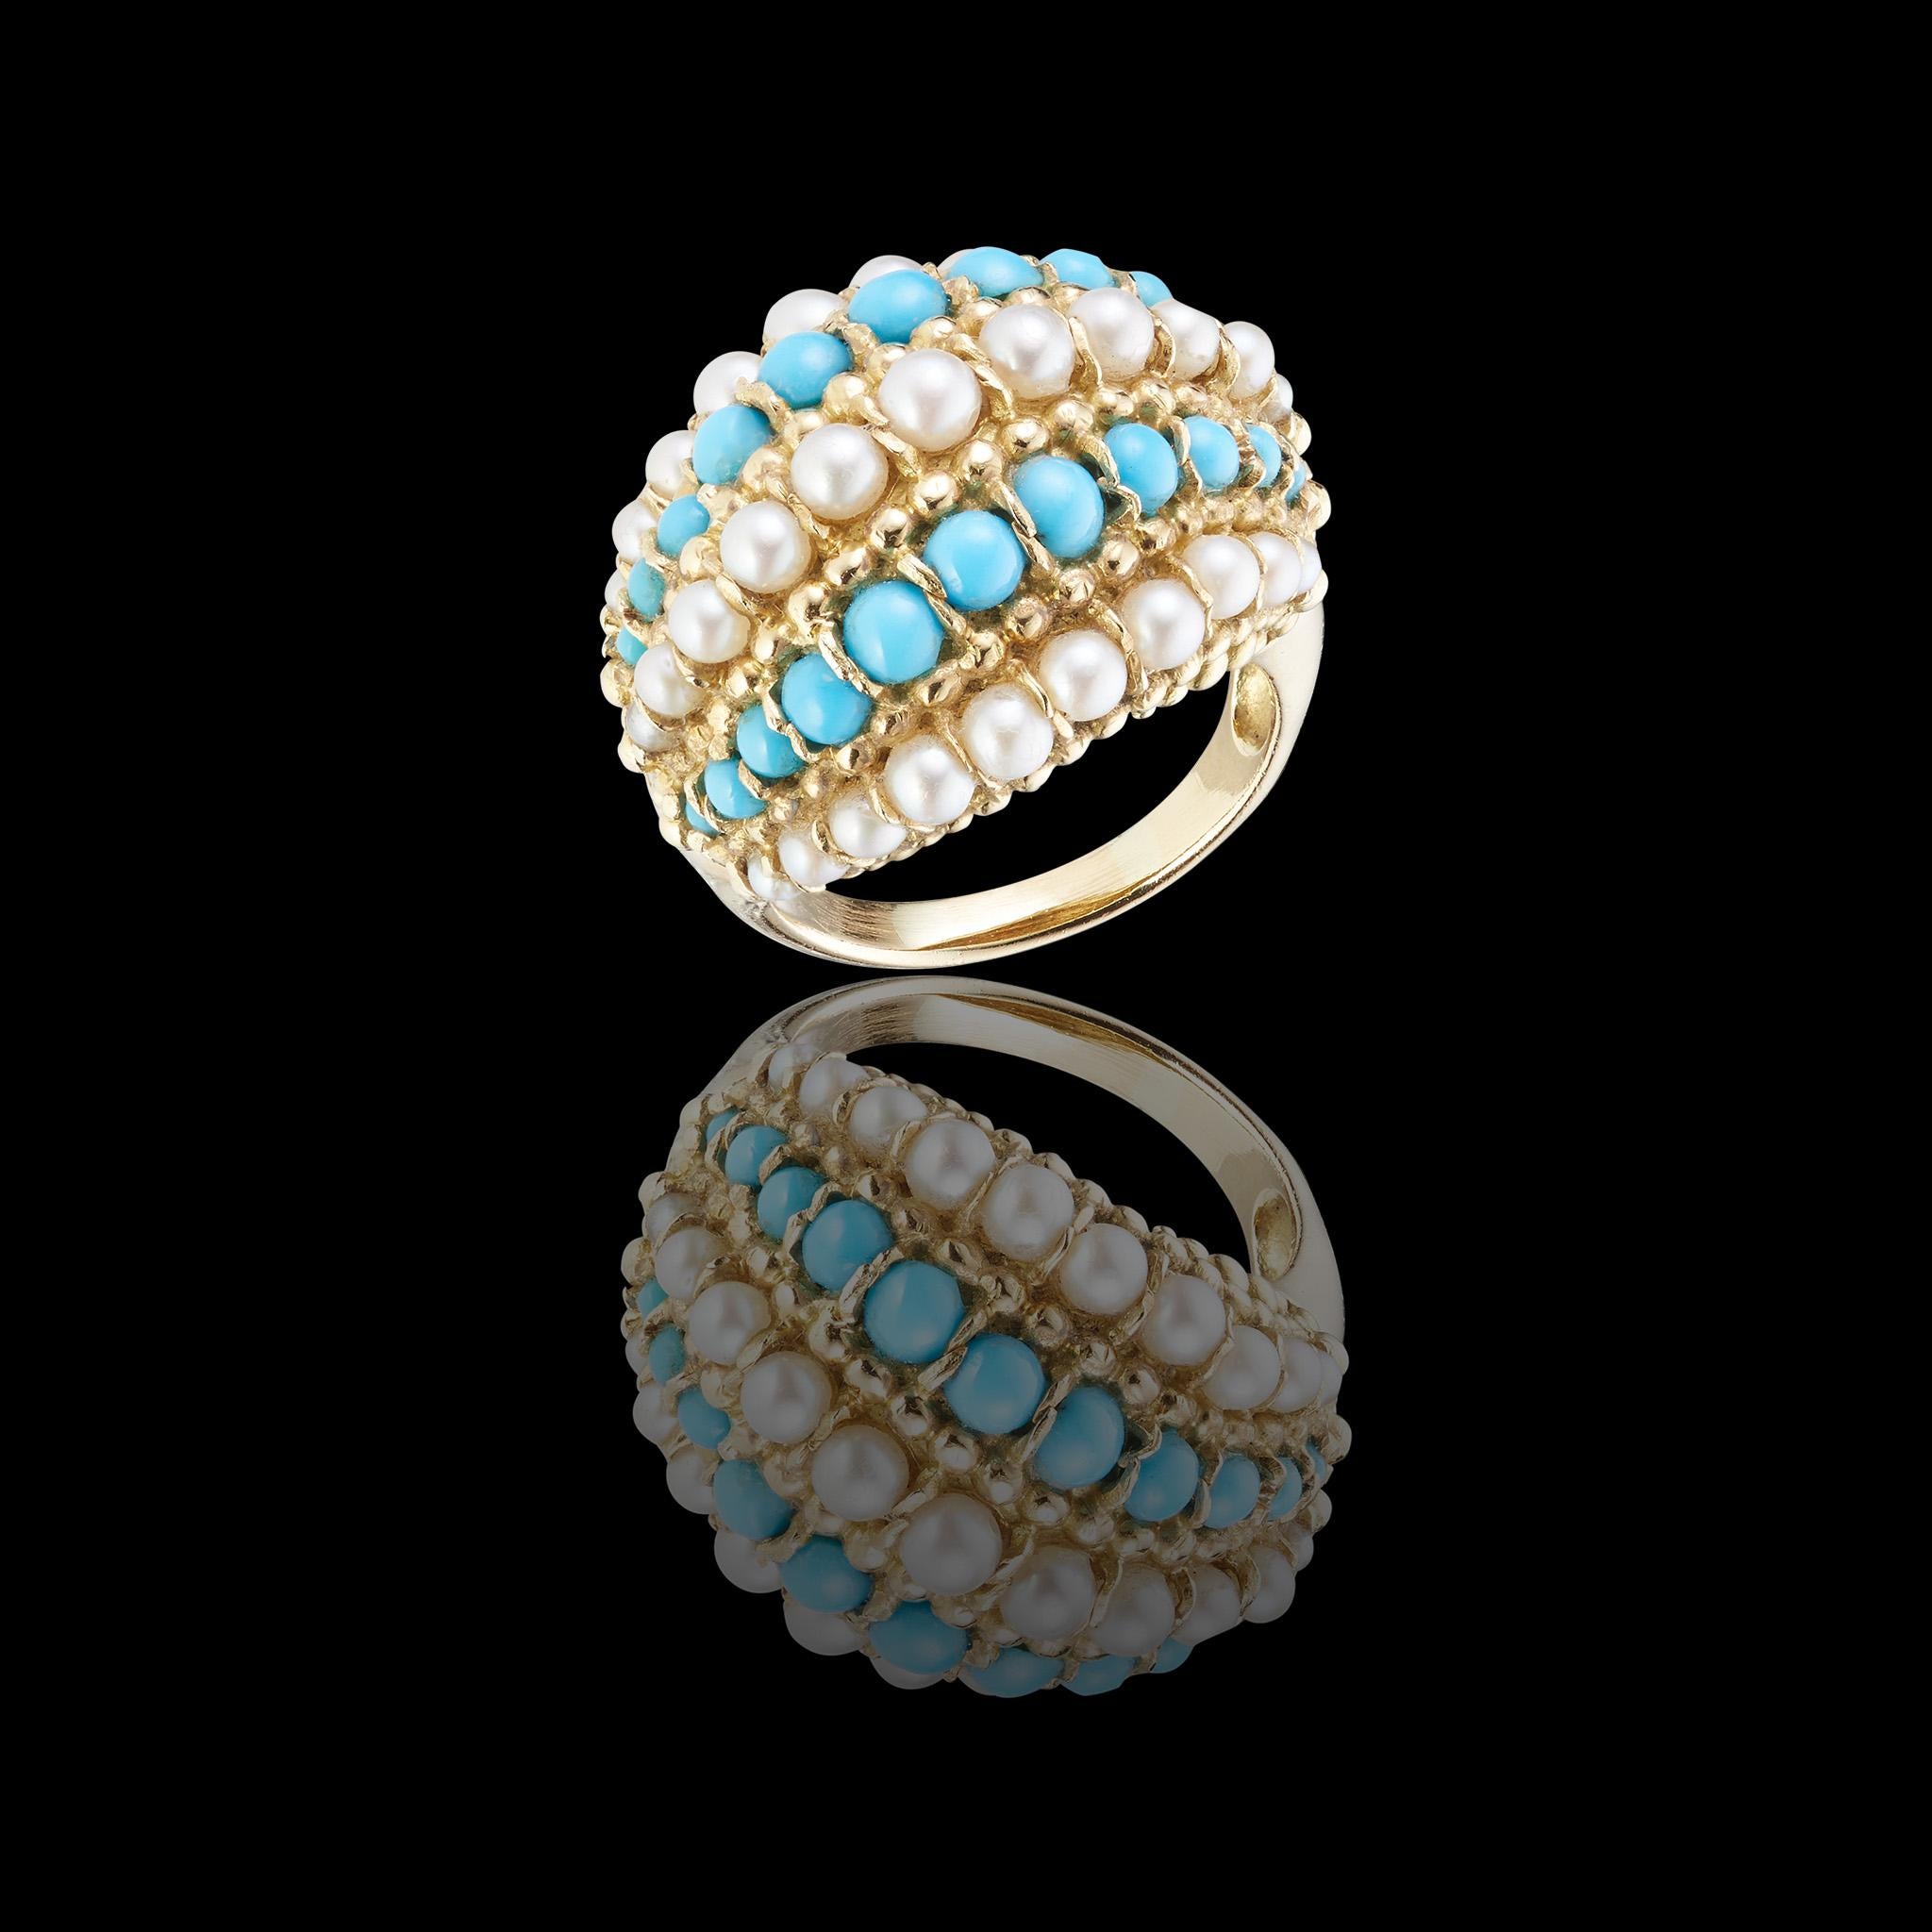 Van Cleef And Arpels 1960s Ring in 18 carats Yellow Gold , Turquoises and Pearls.
-SIGNED: V C A.
-NUMBERED: B 1859.
-SIZE: 52.
-WEIGHT: 13,7 grams.
-H:10 mm X W:15mm.